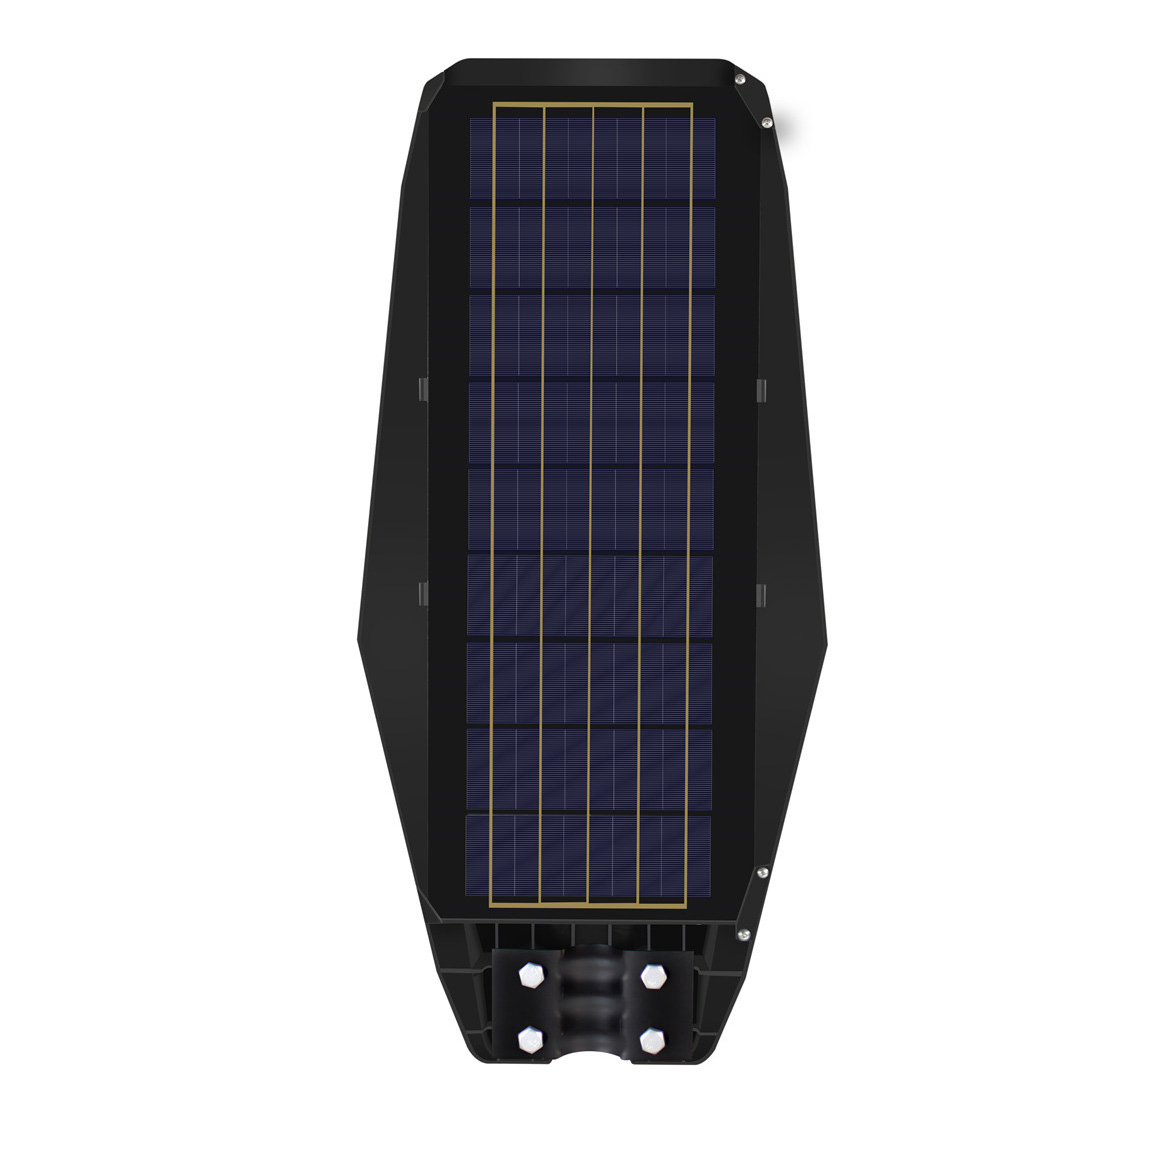 Intrepid Pioneer MJ-LH8200 All In One Solar Street Light with Remote Control